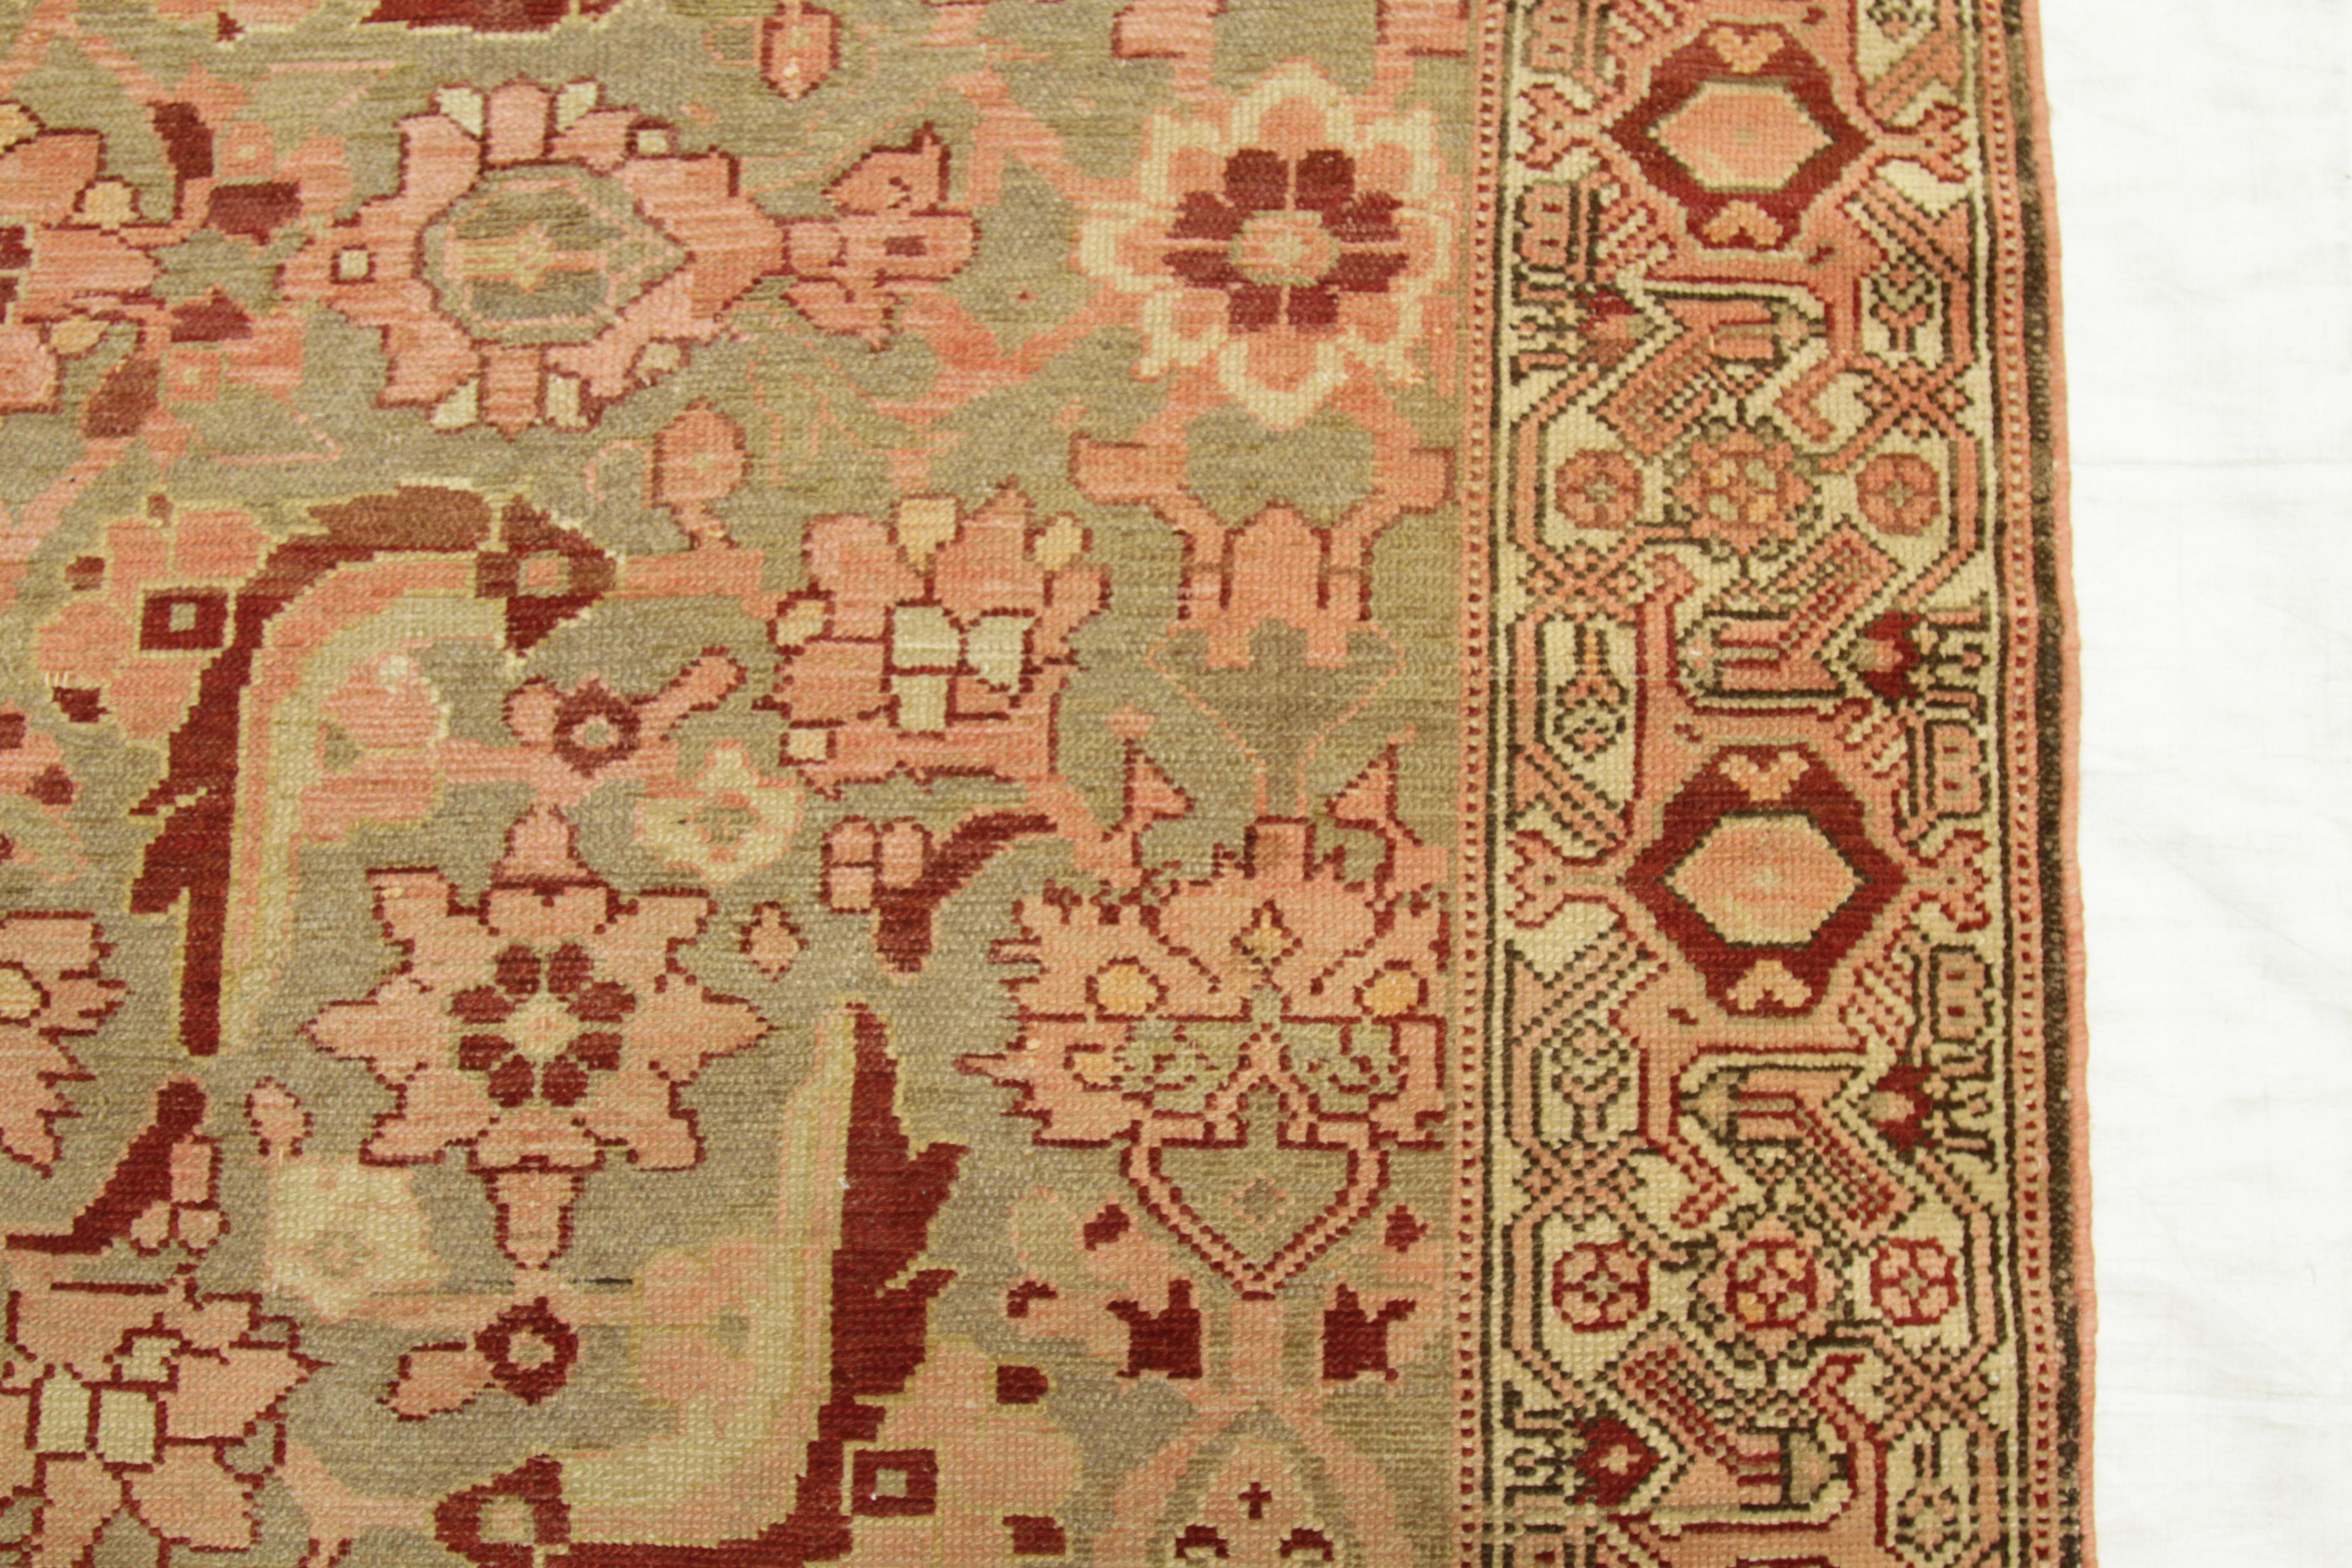 Antique Persian Rug Malayer Style with Fiery Floral Patterns, circa 1920s For Sale 2